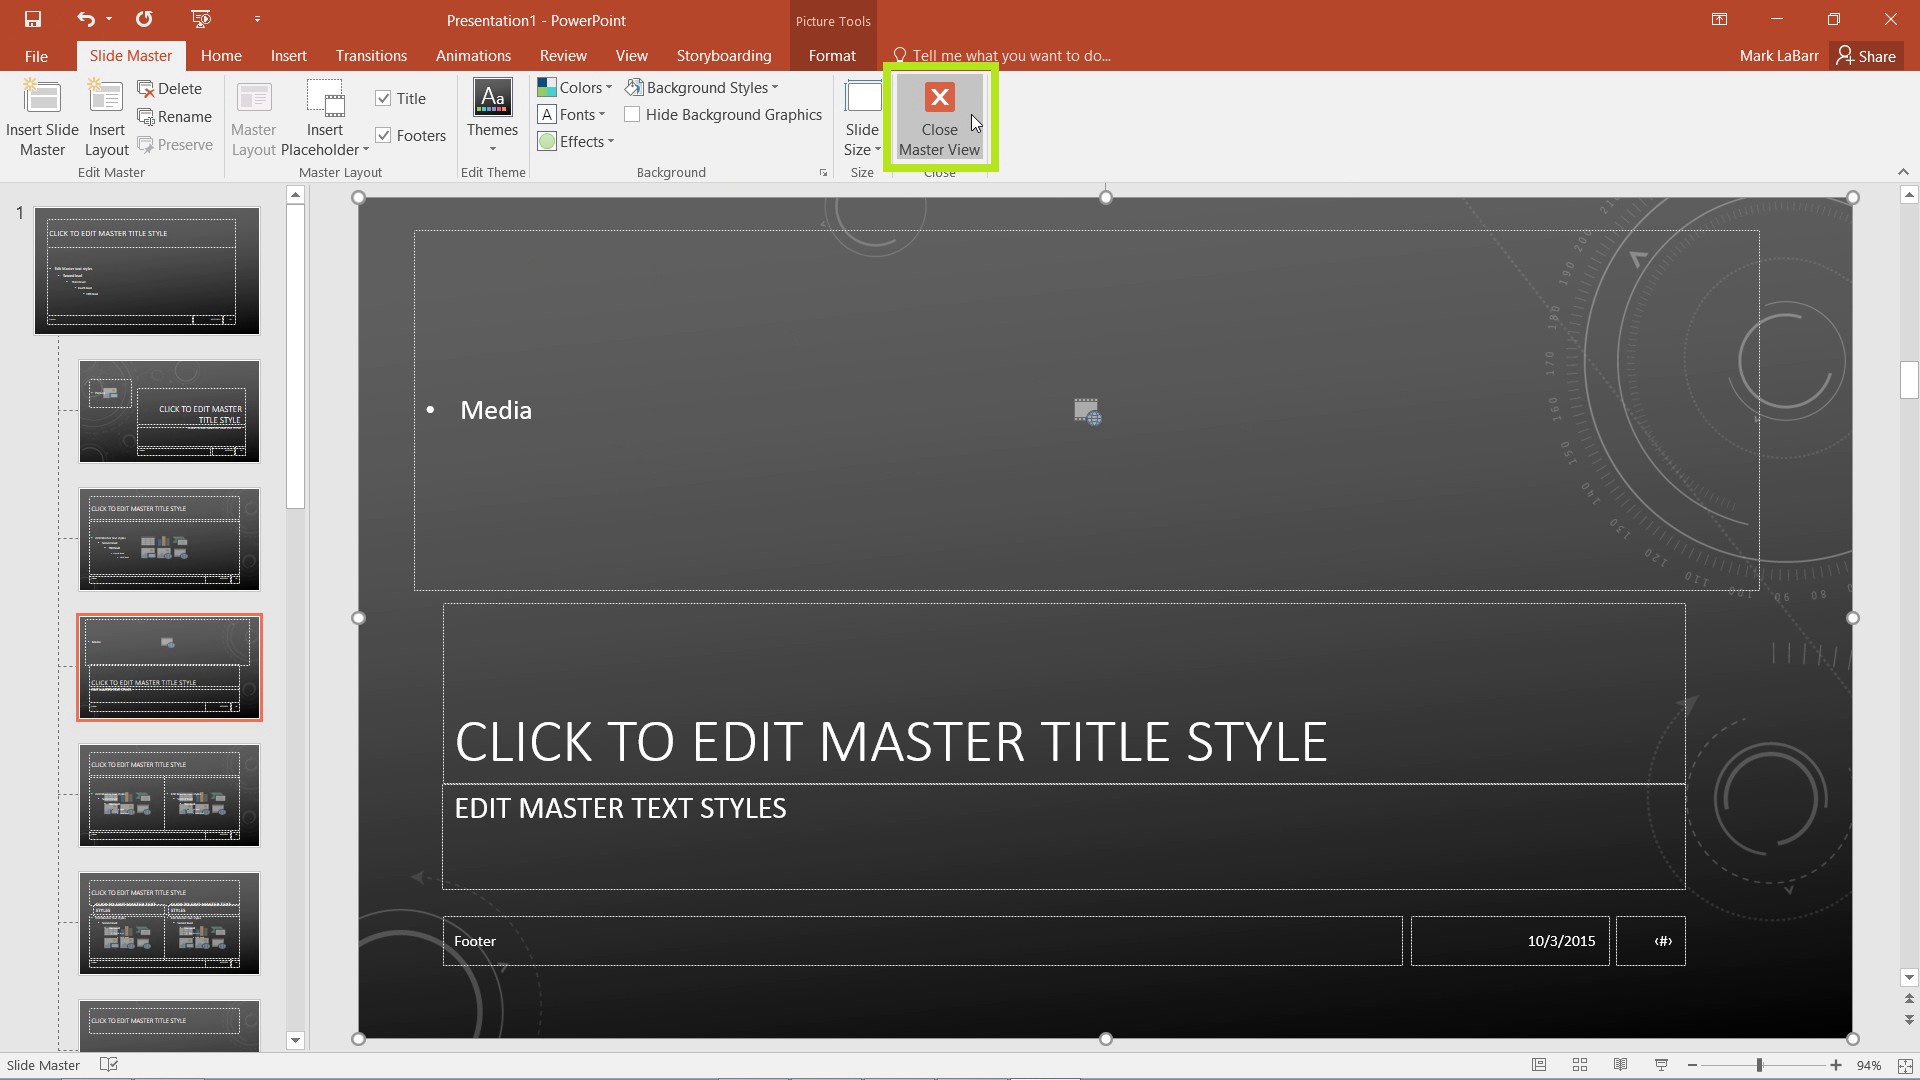 Make Custom Themes in PowerPoint 2016